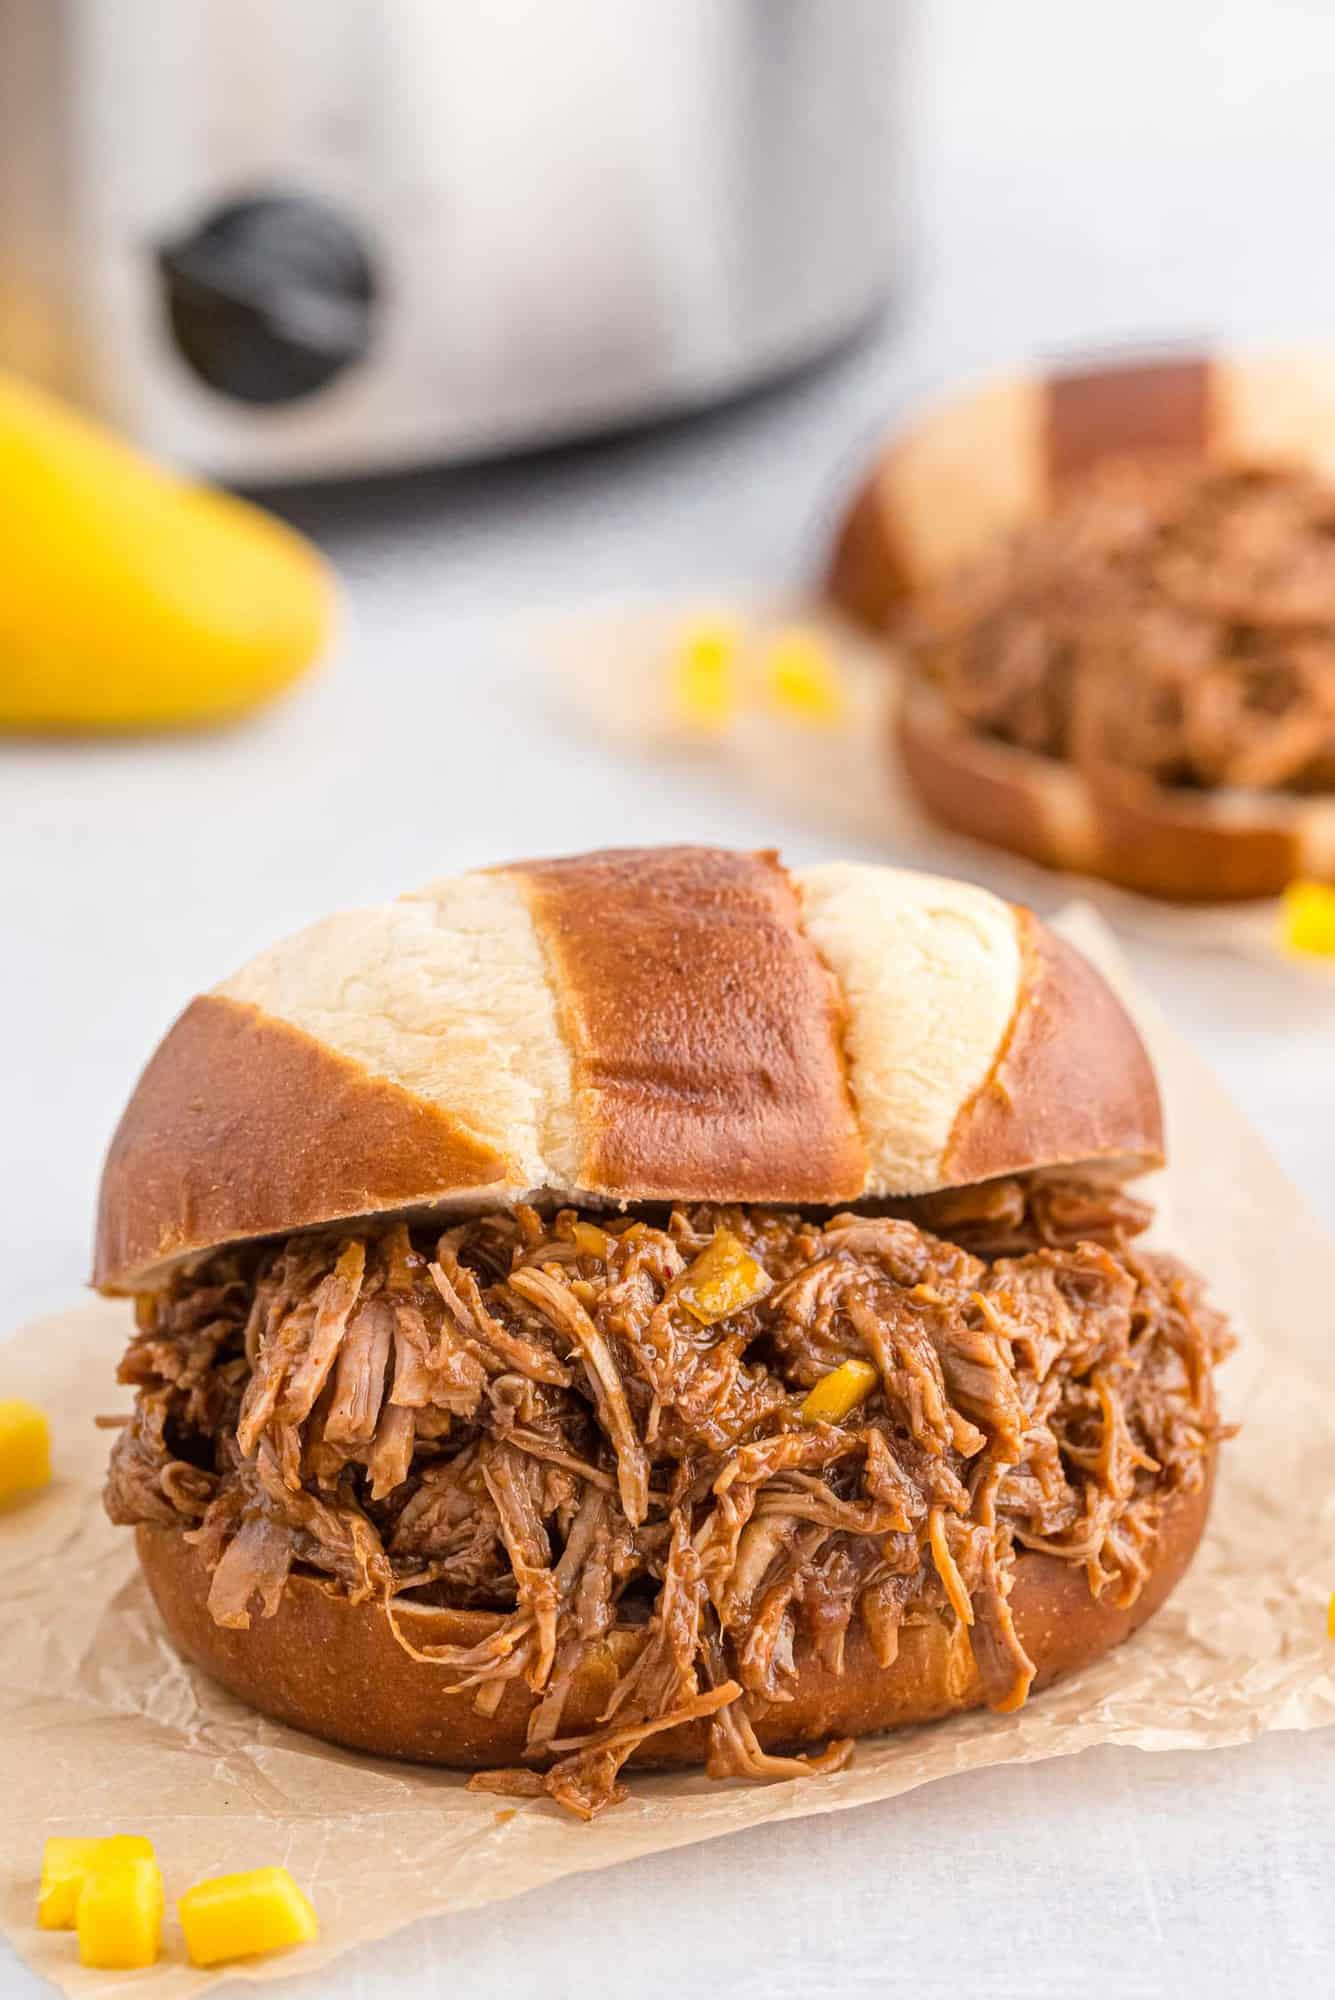 Pretzel bun piled high with pulled pork, a slow cooker pictured in the background.